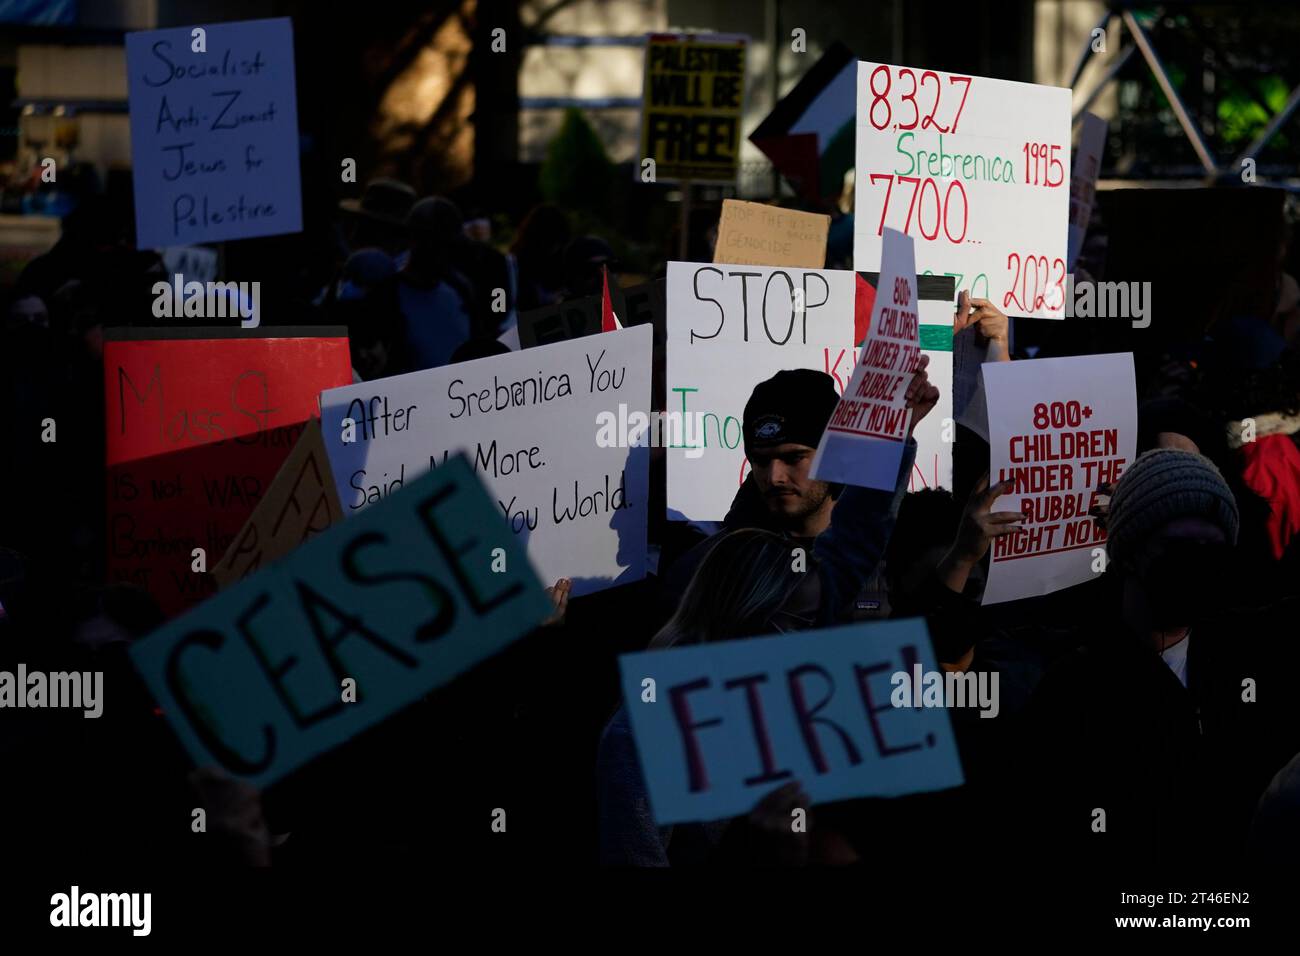 Demonstrators at a pro-Palestinian rally and march wave signs at ...